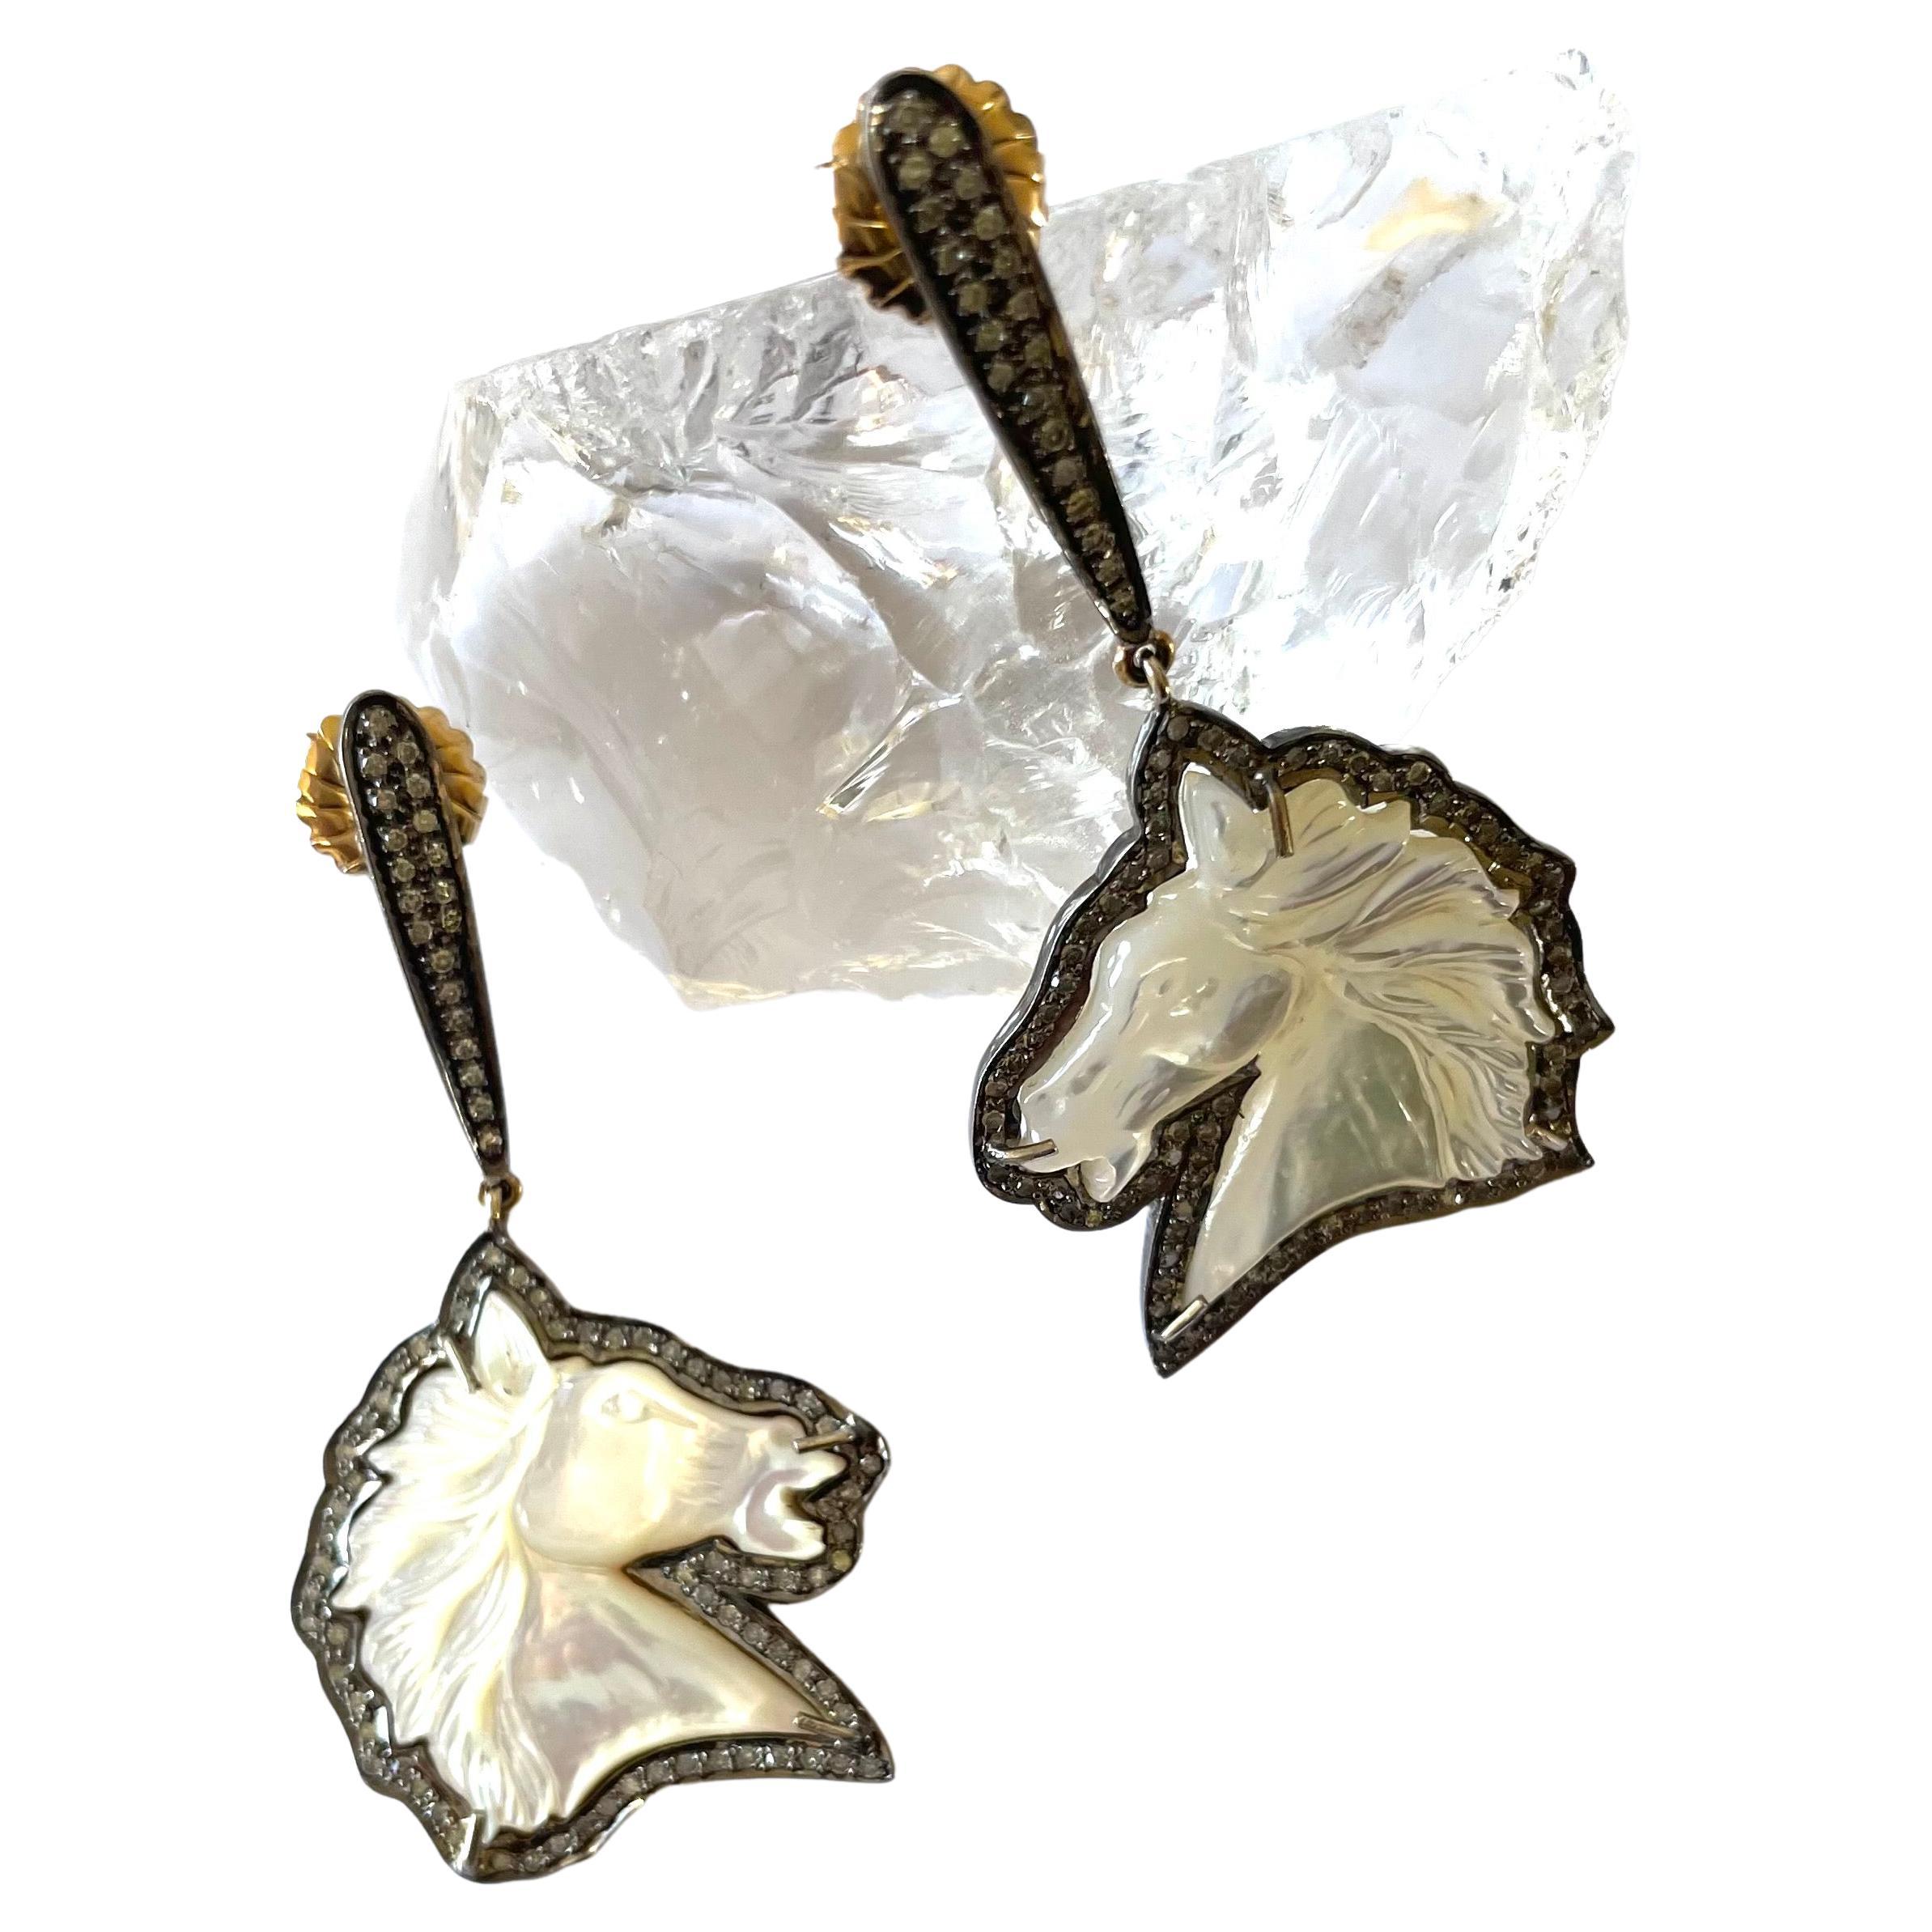 Description
Mother of pearl hand carved horses 28 carats, pave diamond earrings.
Item # E2638

Materials Weight
Mother of Pearl, horse shape, 28 carats.
Pave diamonds, 1.09 carats.
Posts and jumbo backs, 14k white gold.
Rhodium sterling